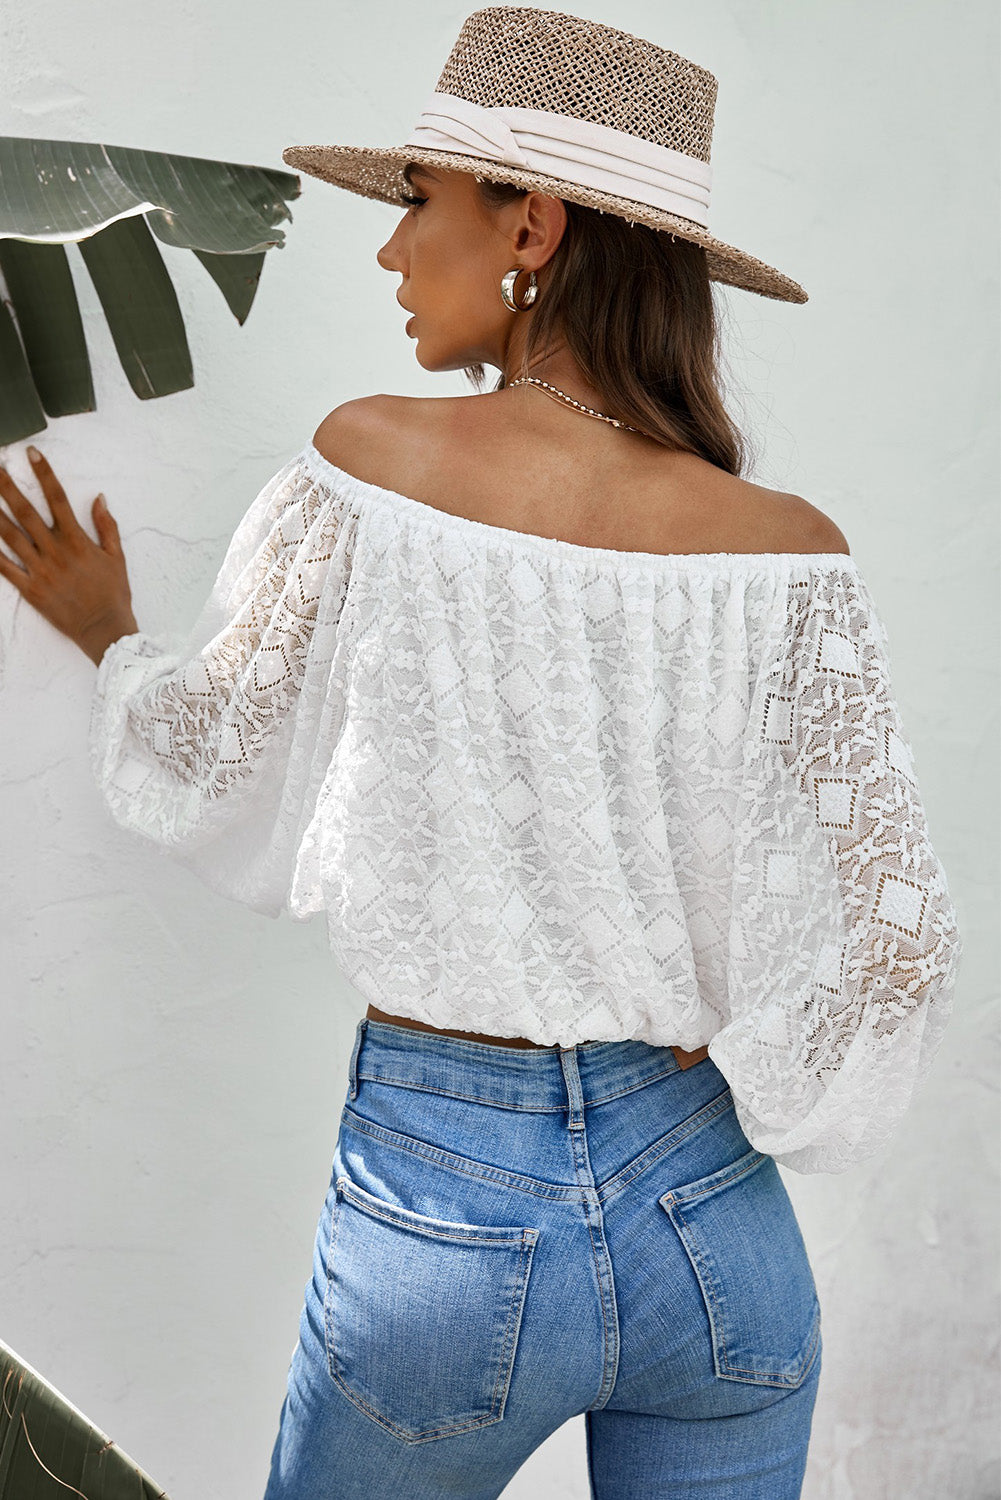 Chic Beige White Lace Off The Shoulder Puff Sleeve Blouse